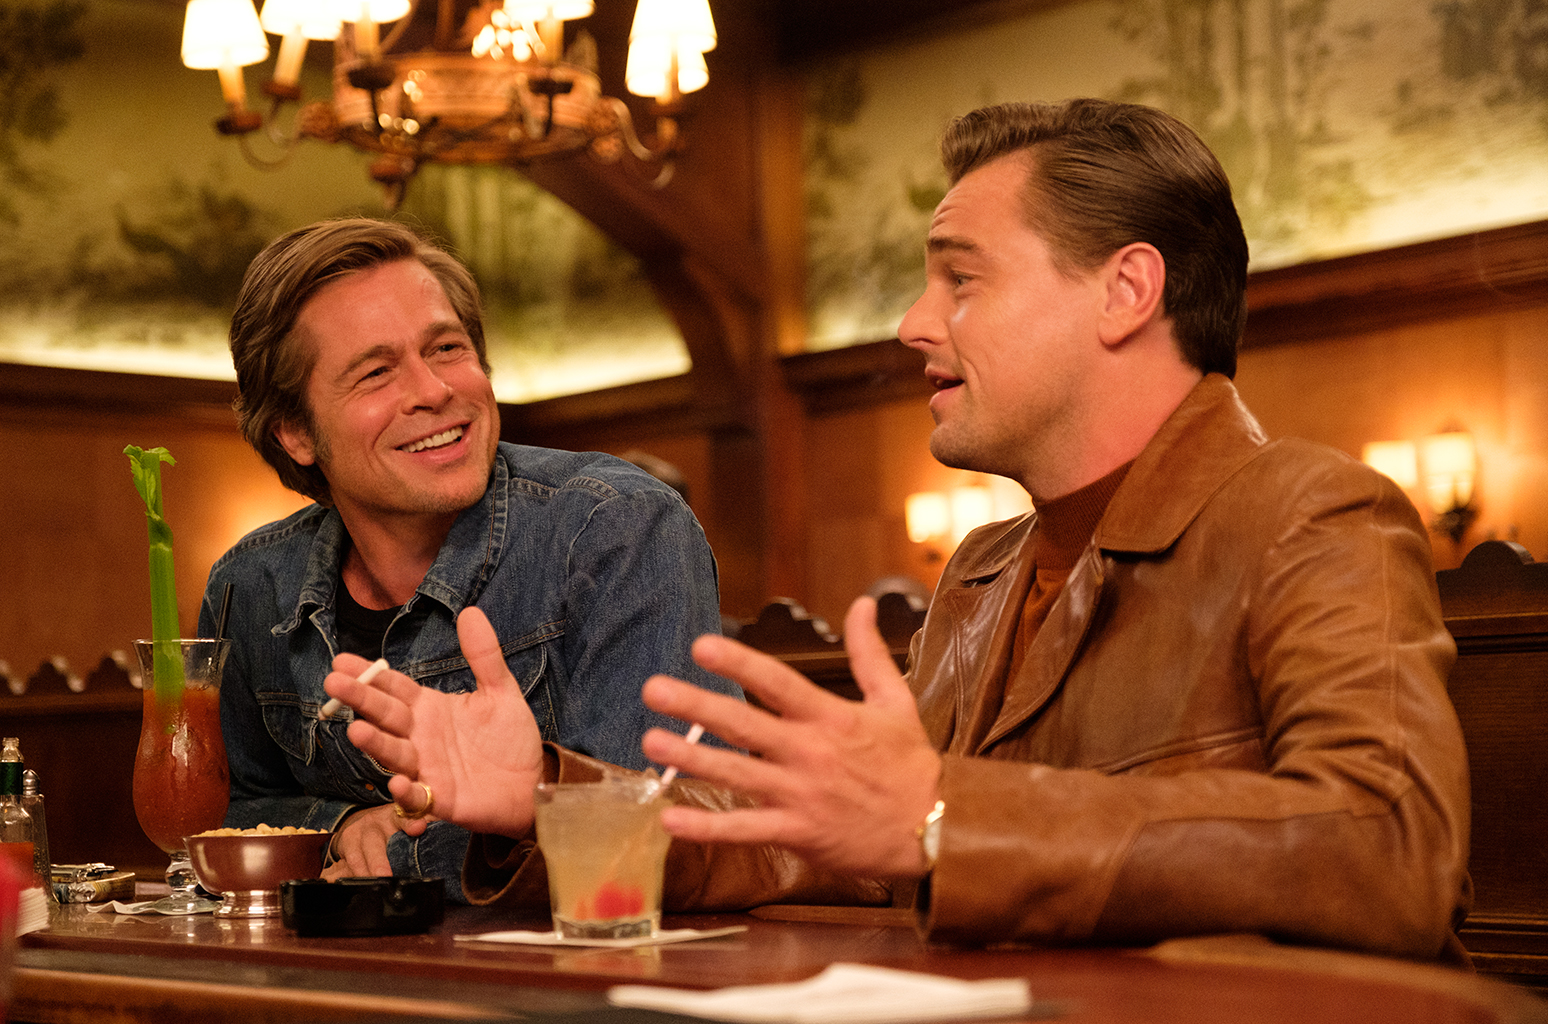 'The Irishman' &amp; 'Once Upon a Time in Hollywood' Among Guild of Music Supervisors Awards Nominees - www.billboard.com - Hollywood